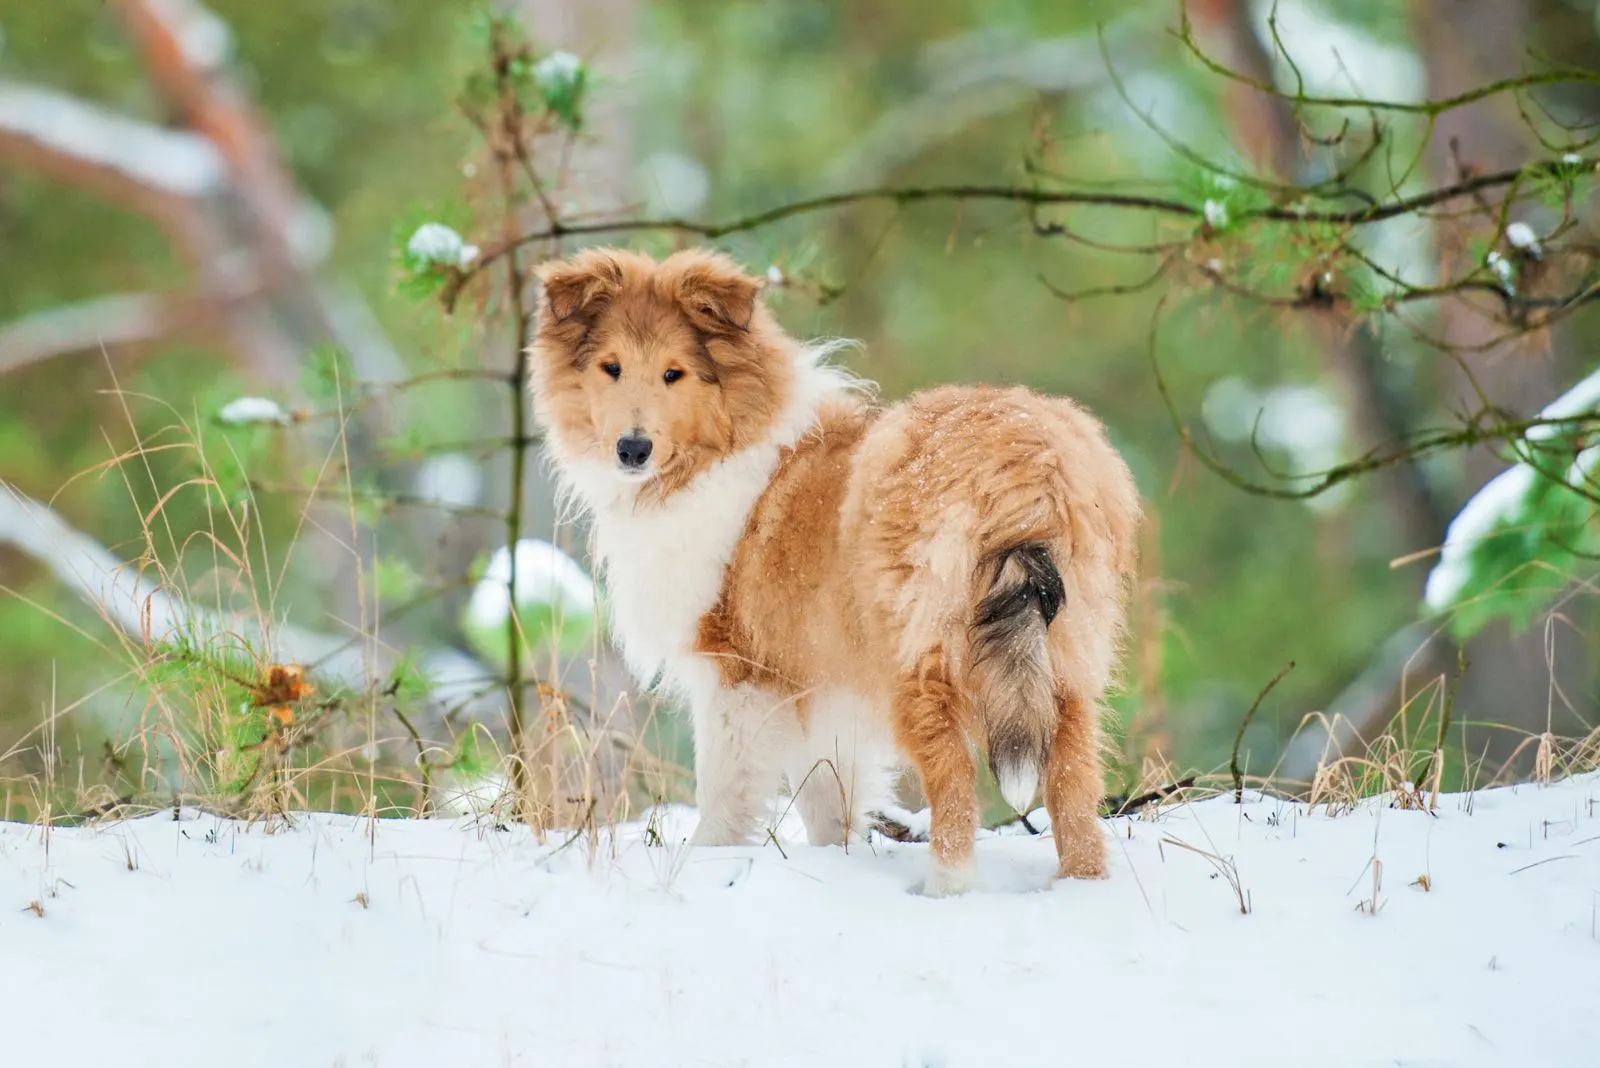 Rough Collie standing on snow